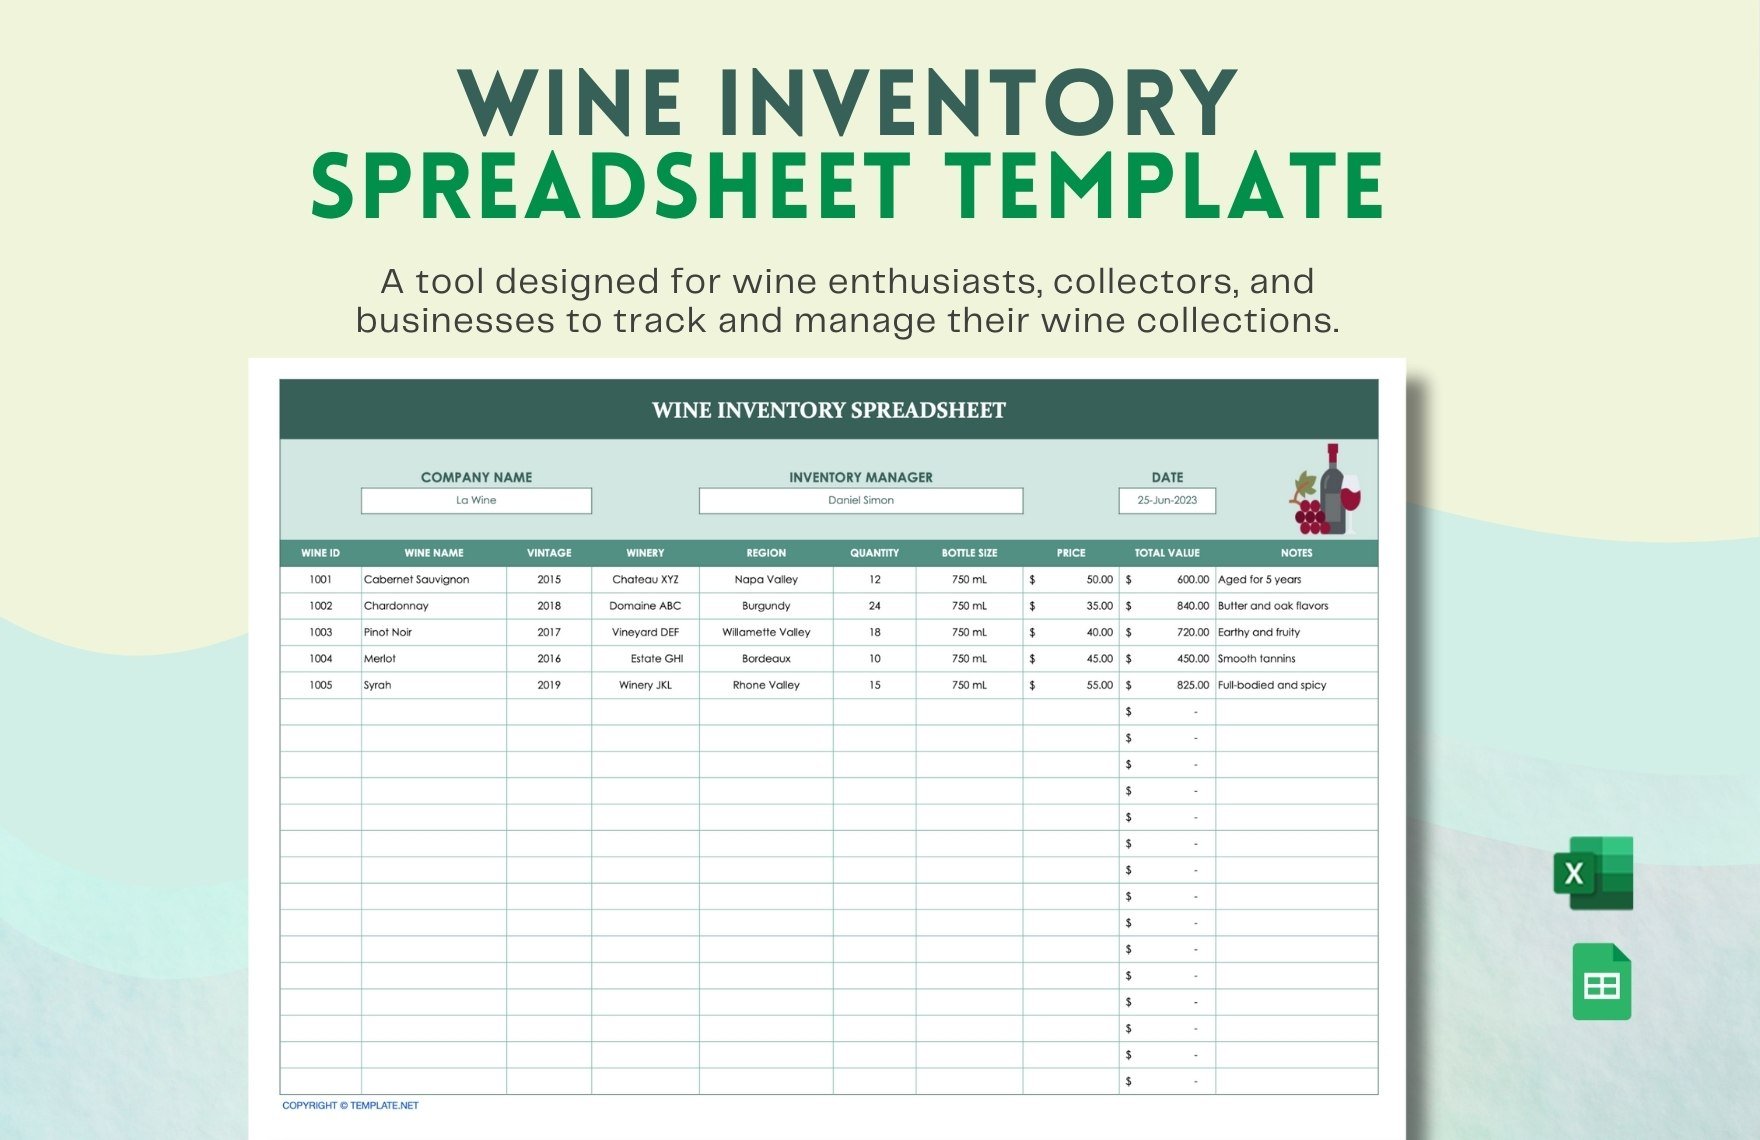 Wine Inventory Spreadsheet Template in Excel, Google Sheets